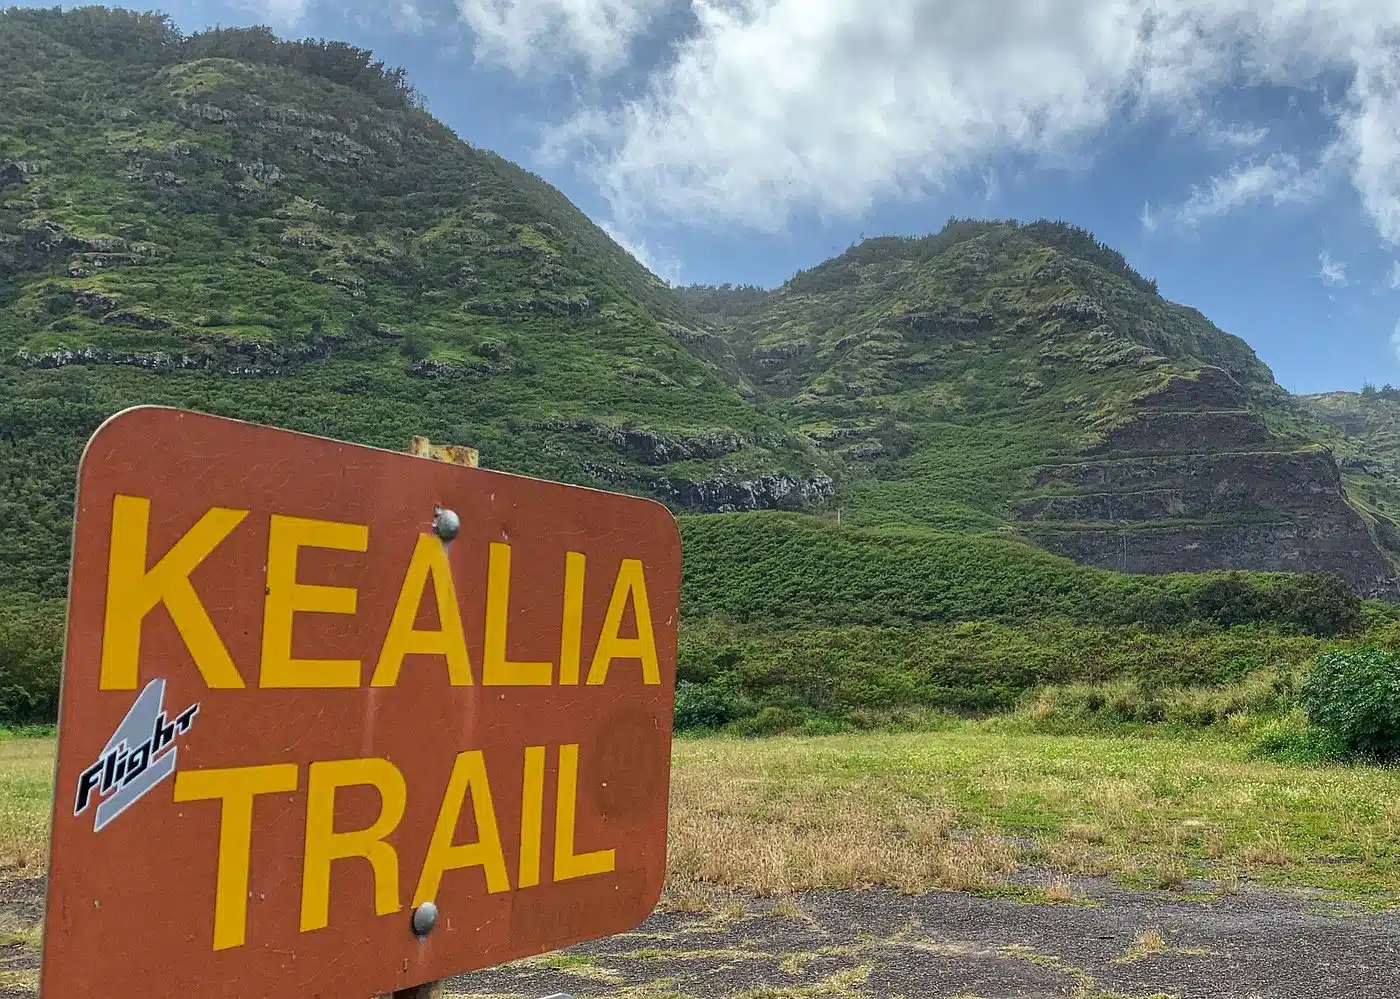 The Kealia Trail as part of the North Shore Oahu Hikes